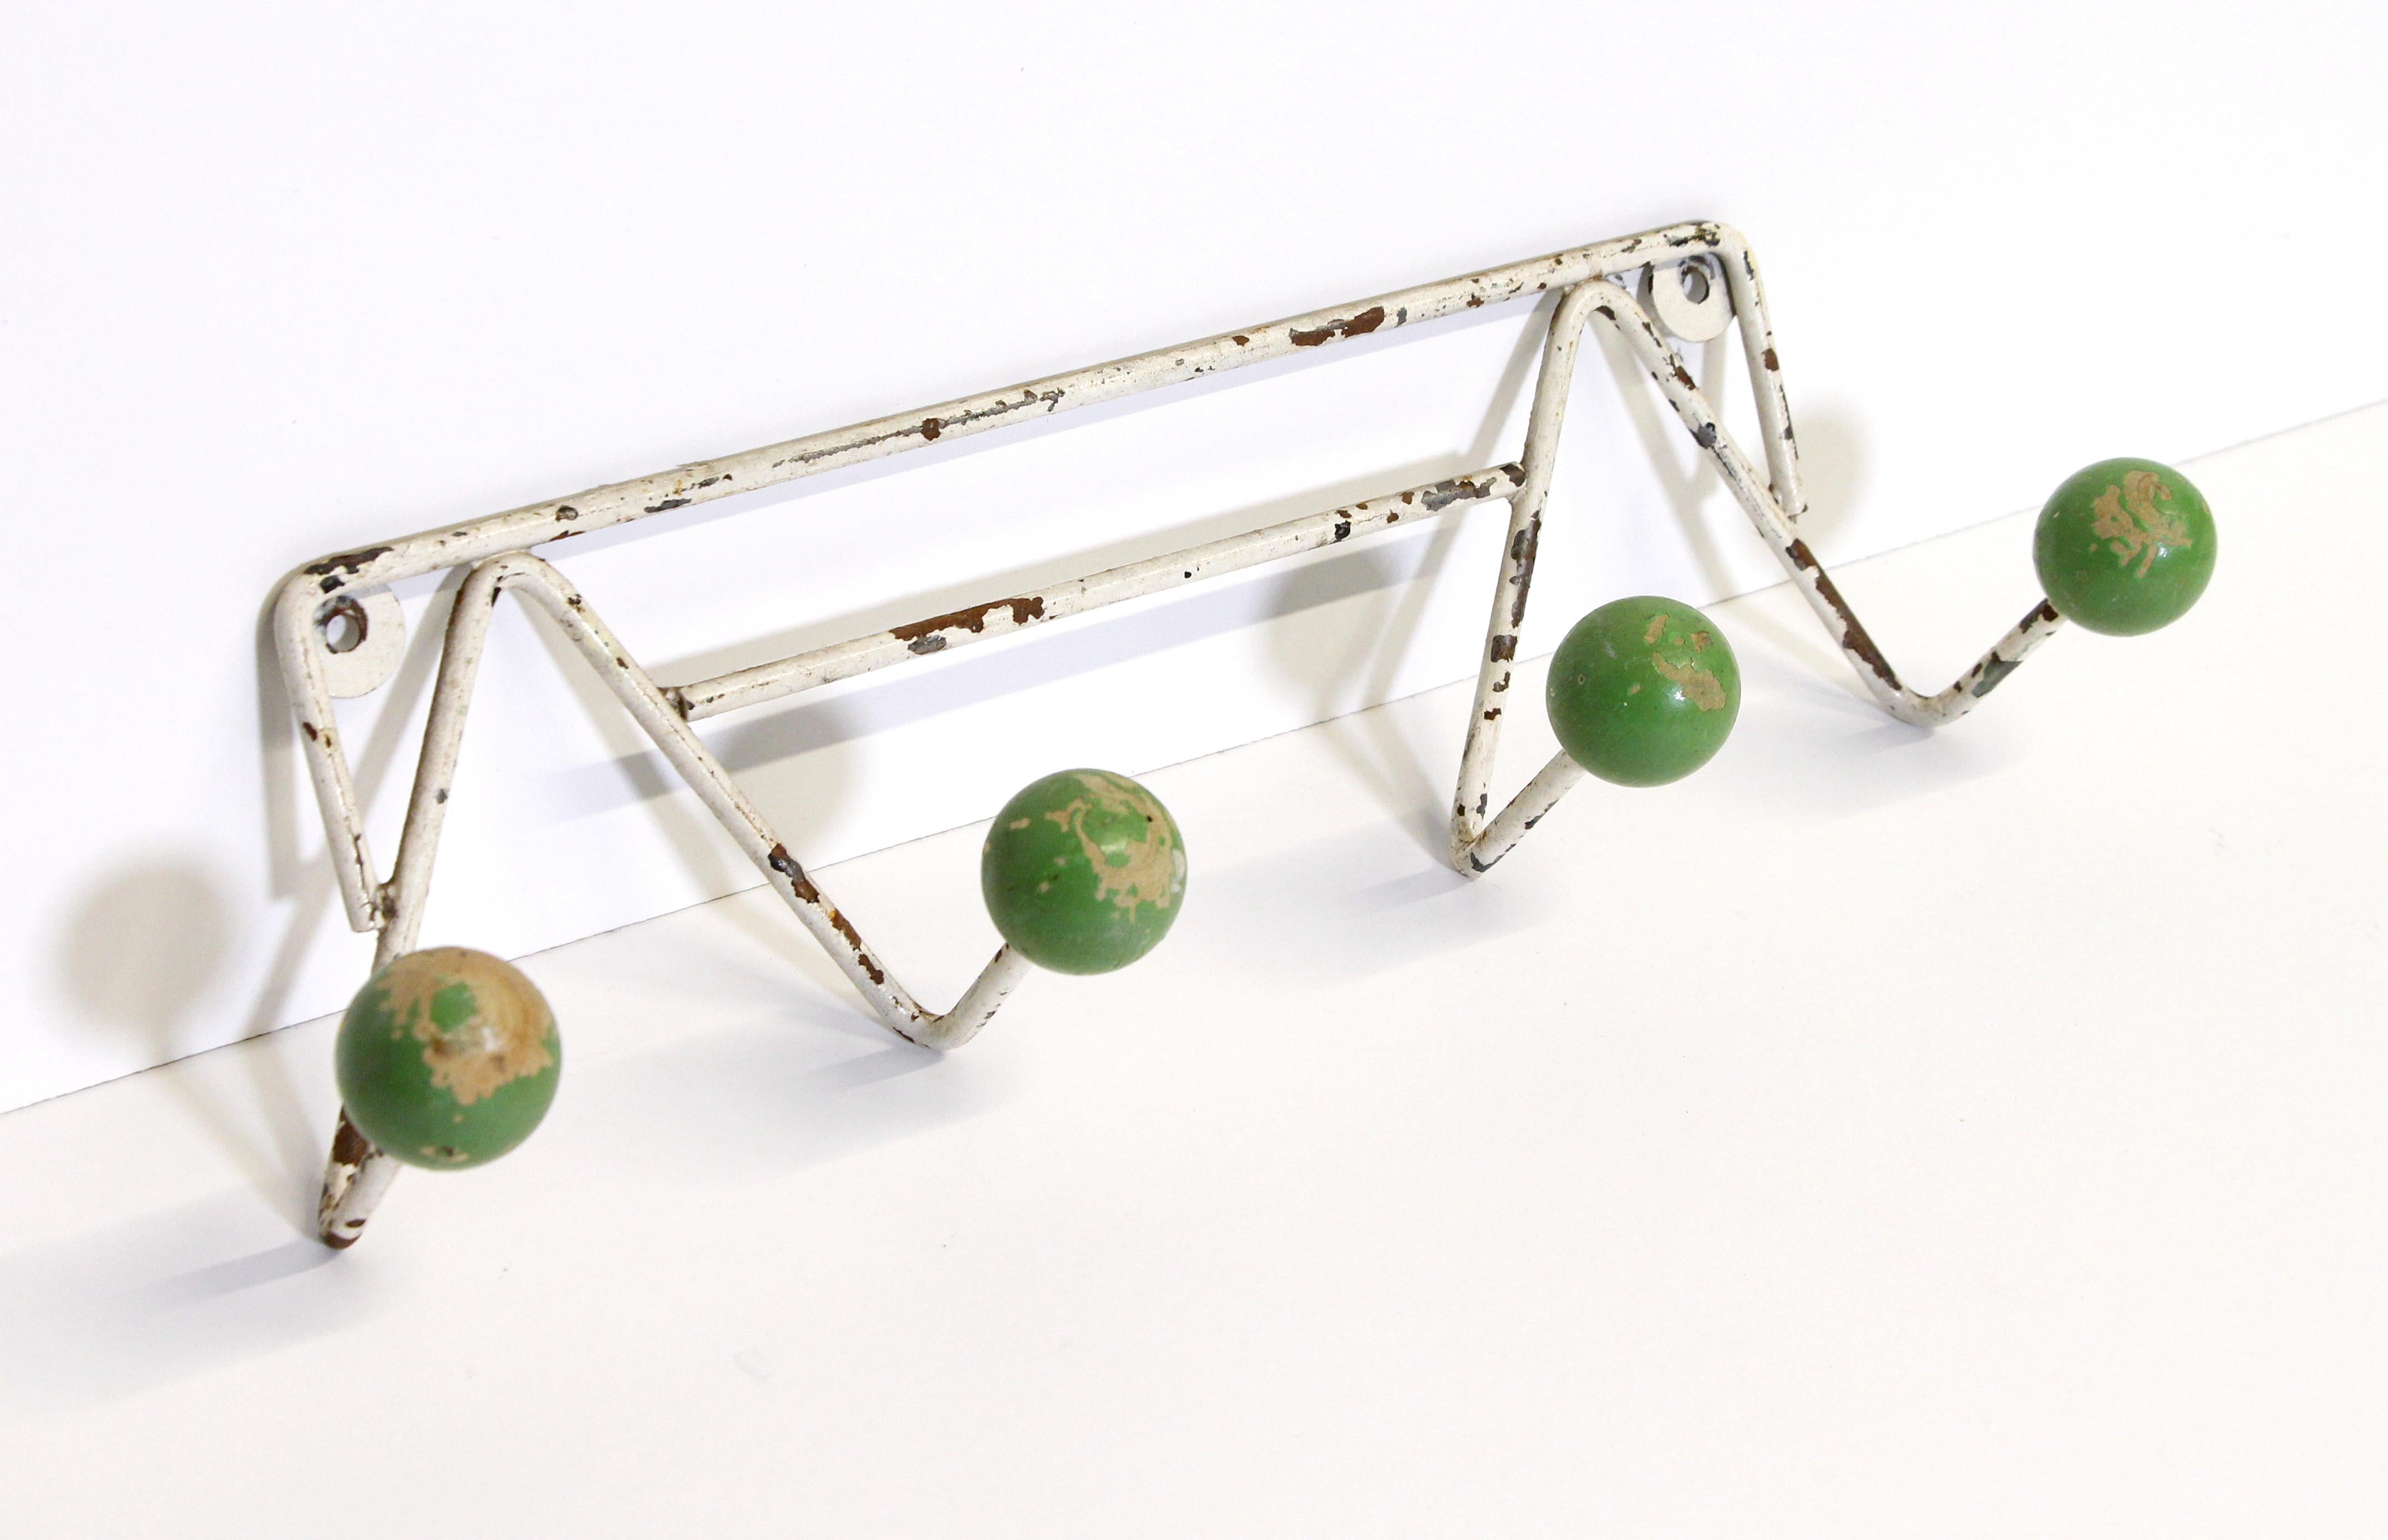 European Mid-Century Modern white wrought iron wall rack.  It features two double arms each holding a green wooden ball hook.  There is distressing in the paint from age giving it a shabby chic look.  This rack is imported from Belgium. This can be